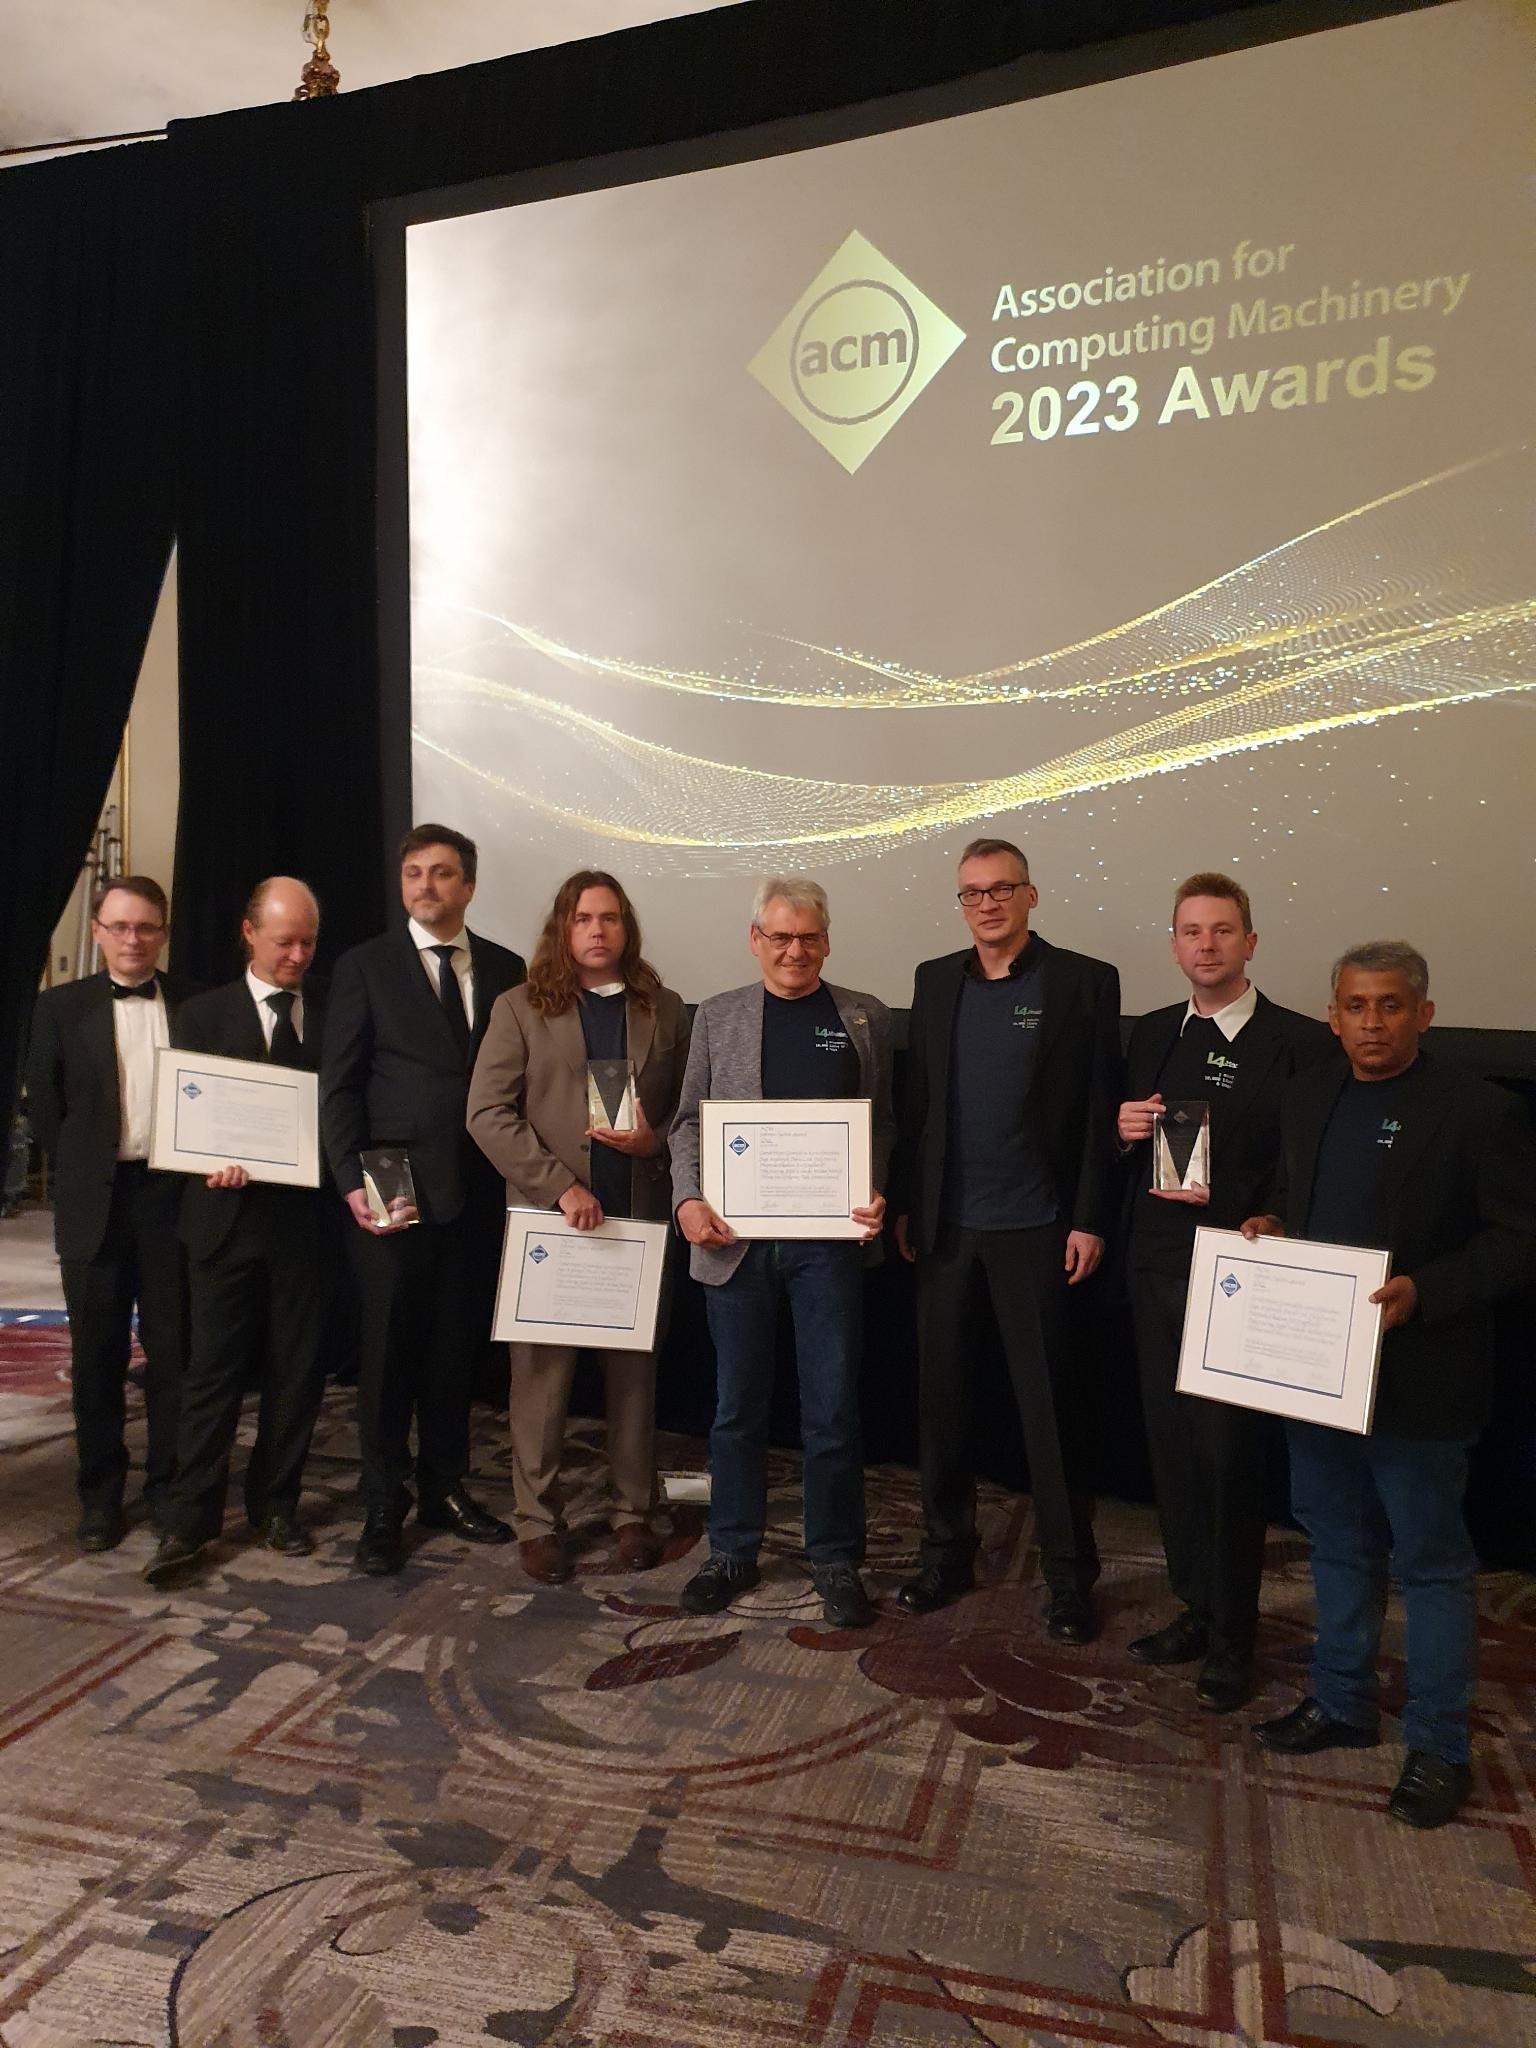 Some of the team receiving the ACM SSA award